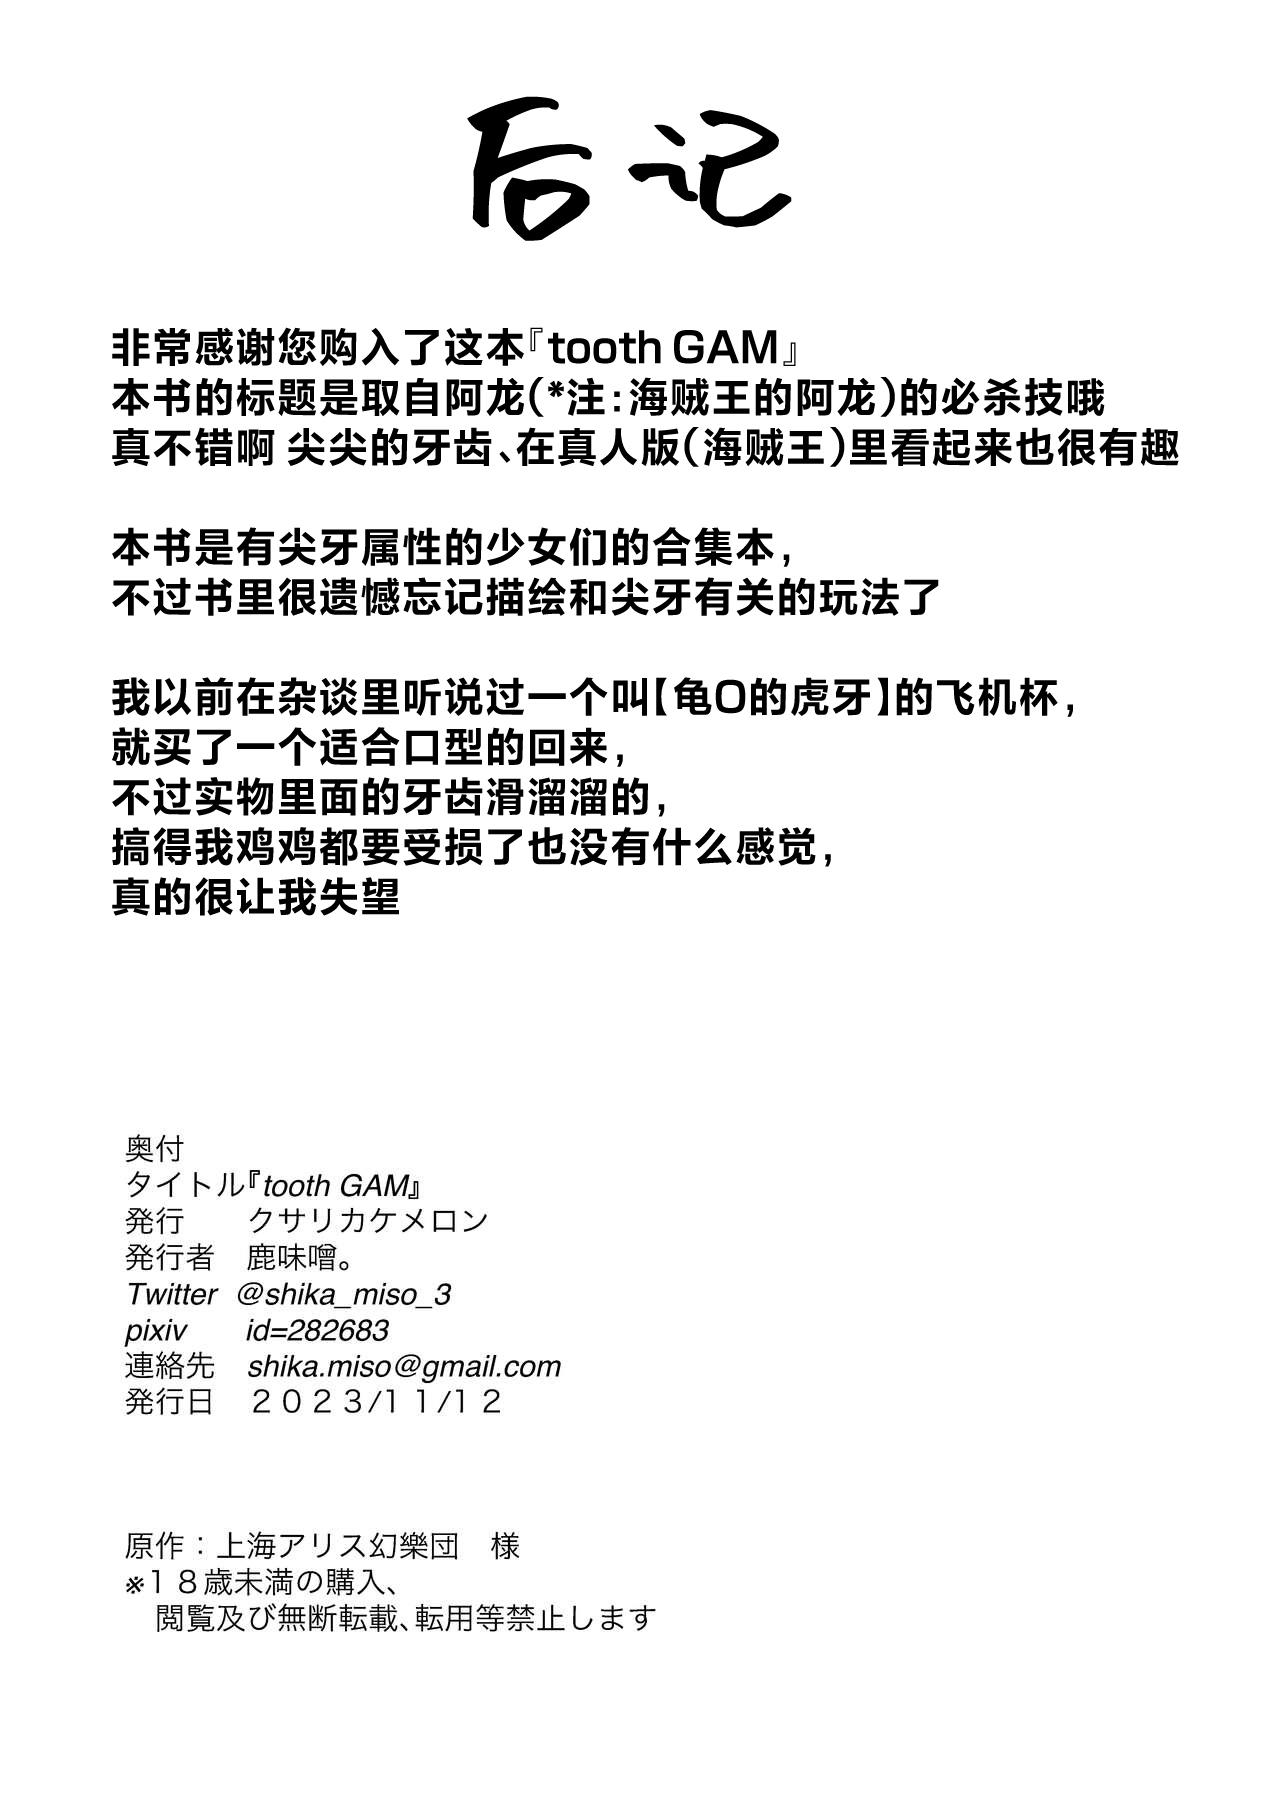 tooth GAM 22